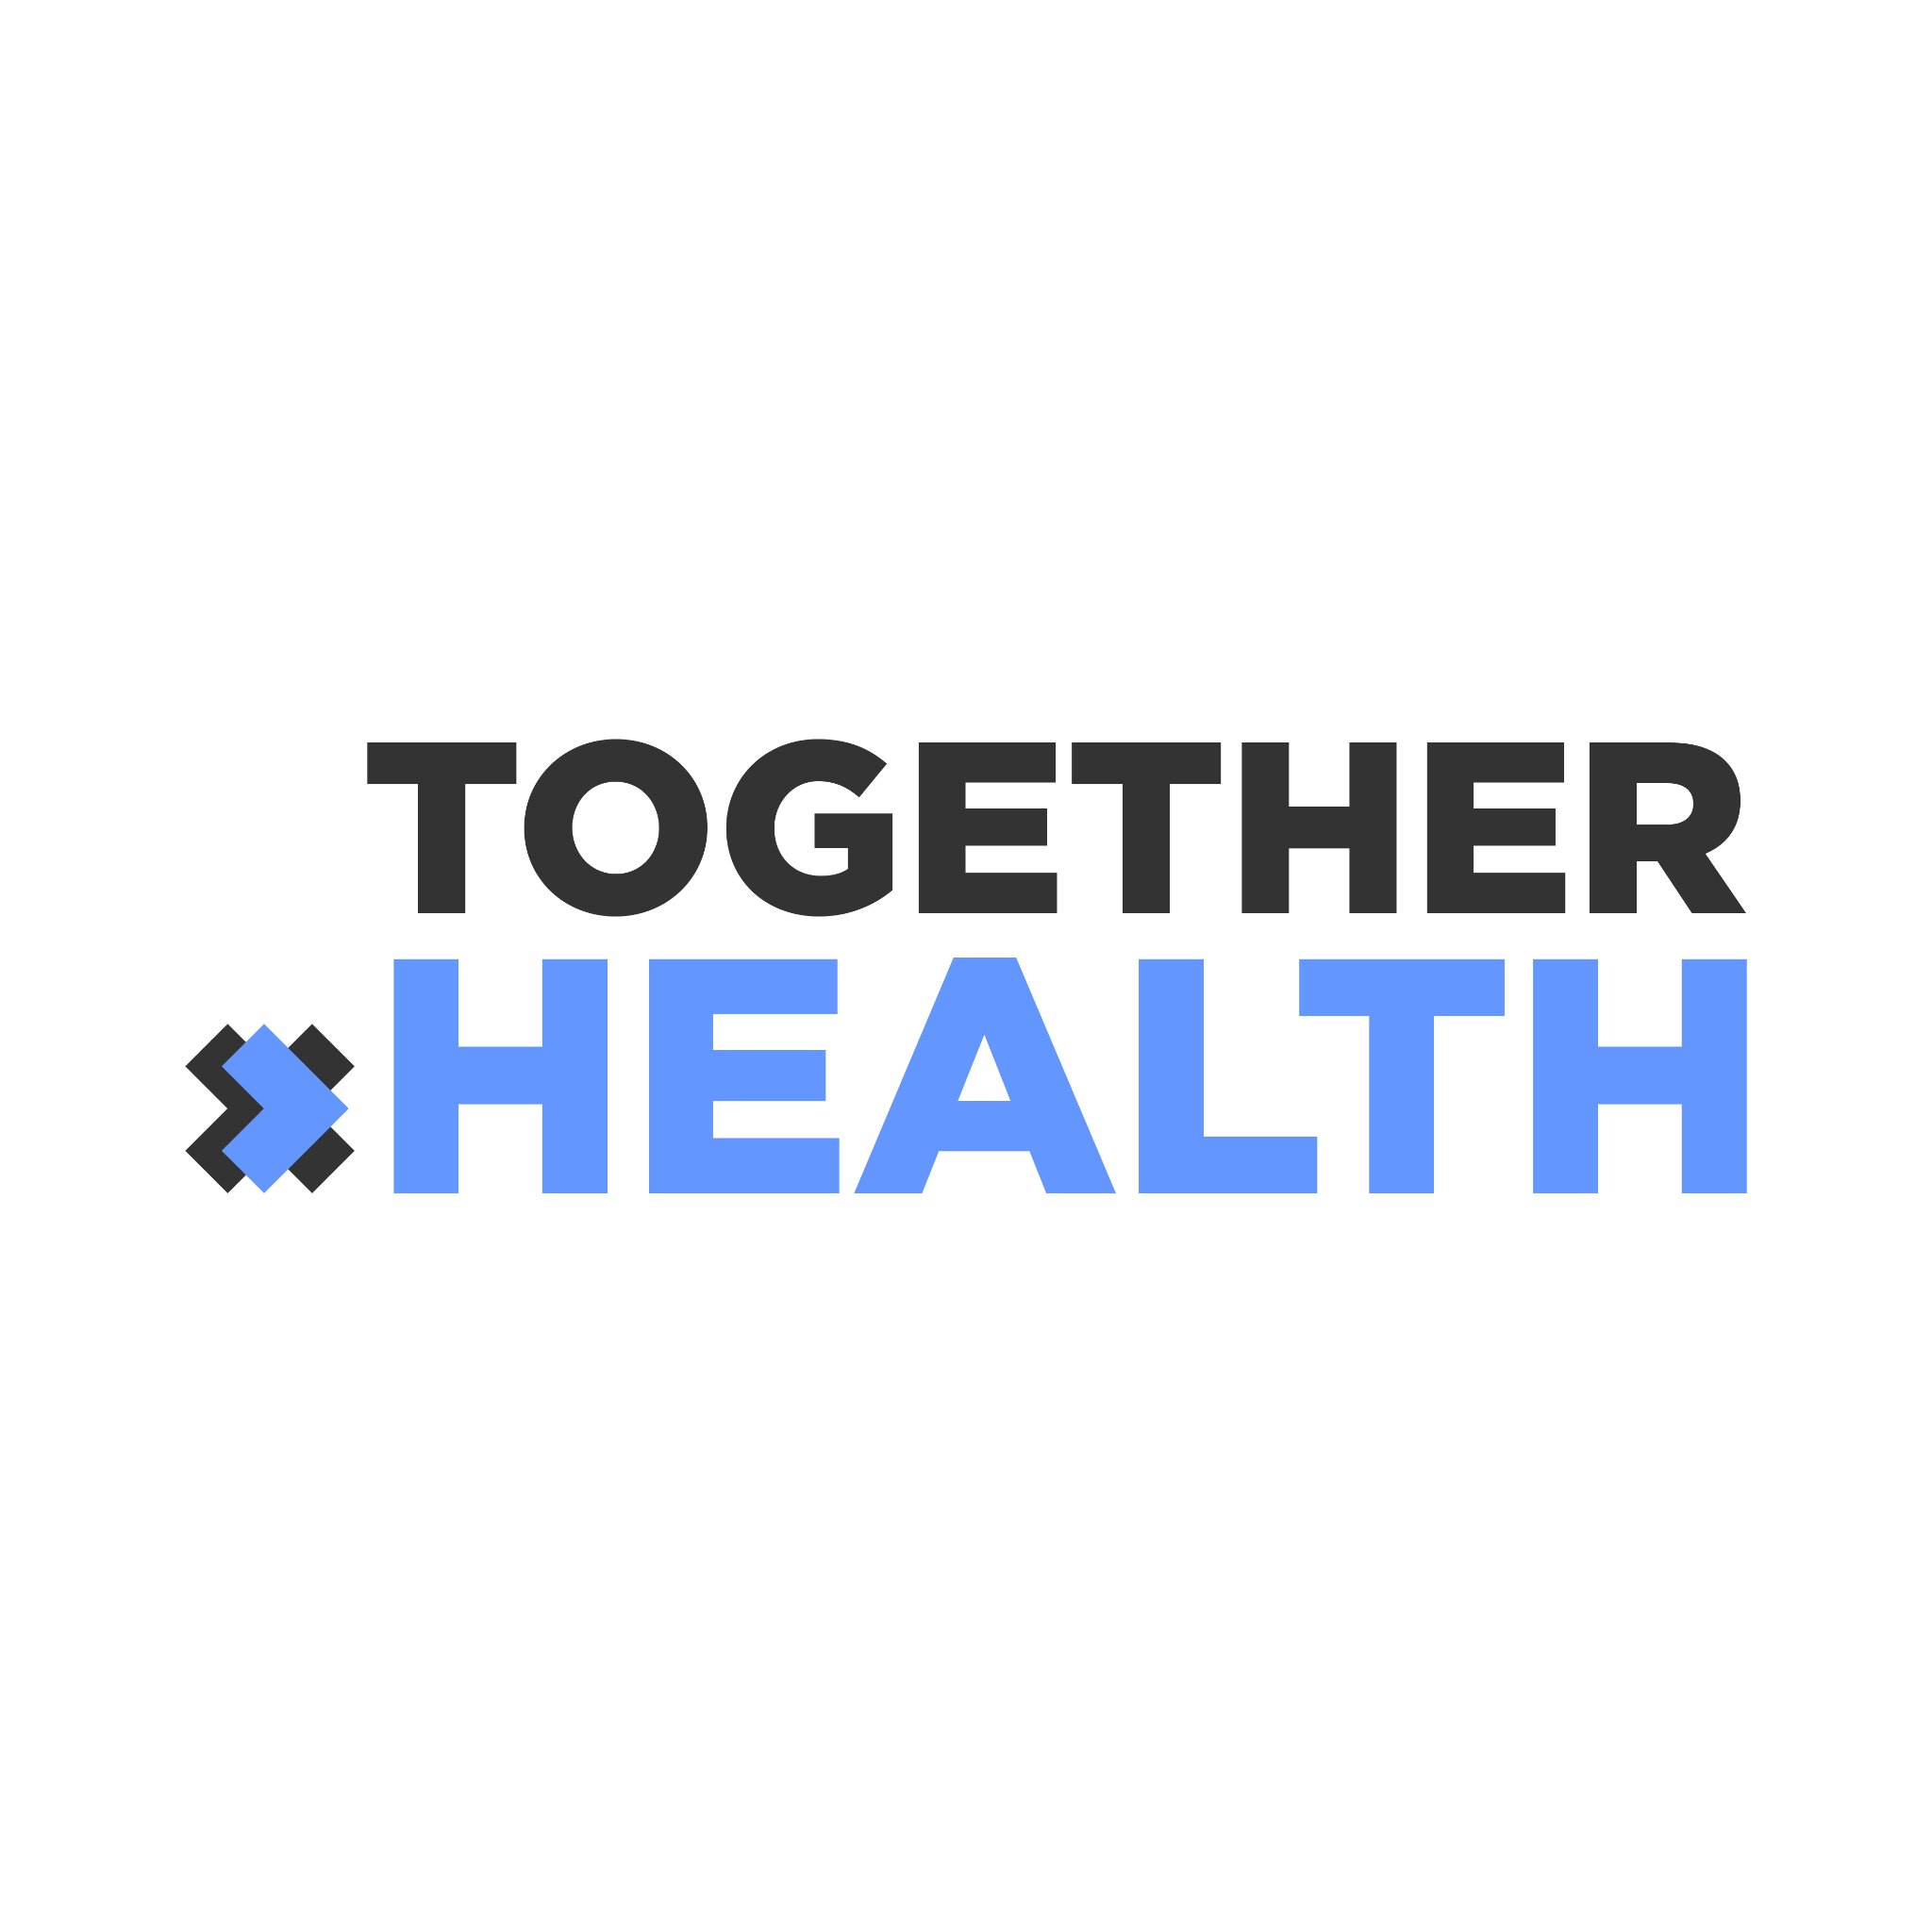 https://t.co/N8rNr2l67p is a collaborative of ecosystems and innovators moving health forward together. #TogetherHealth